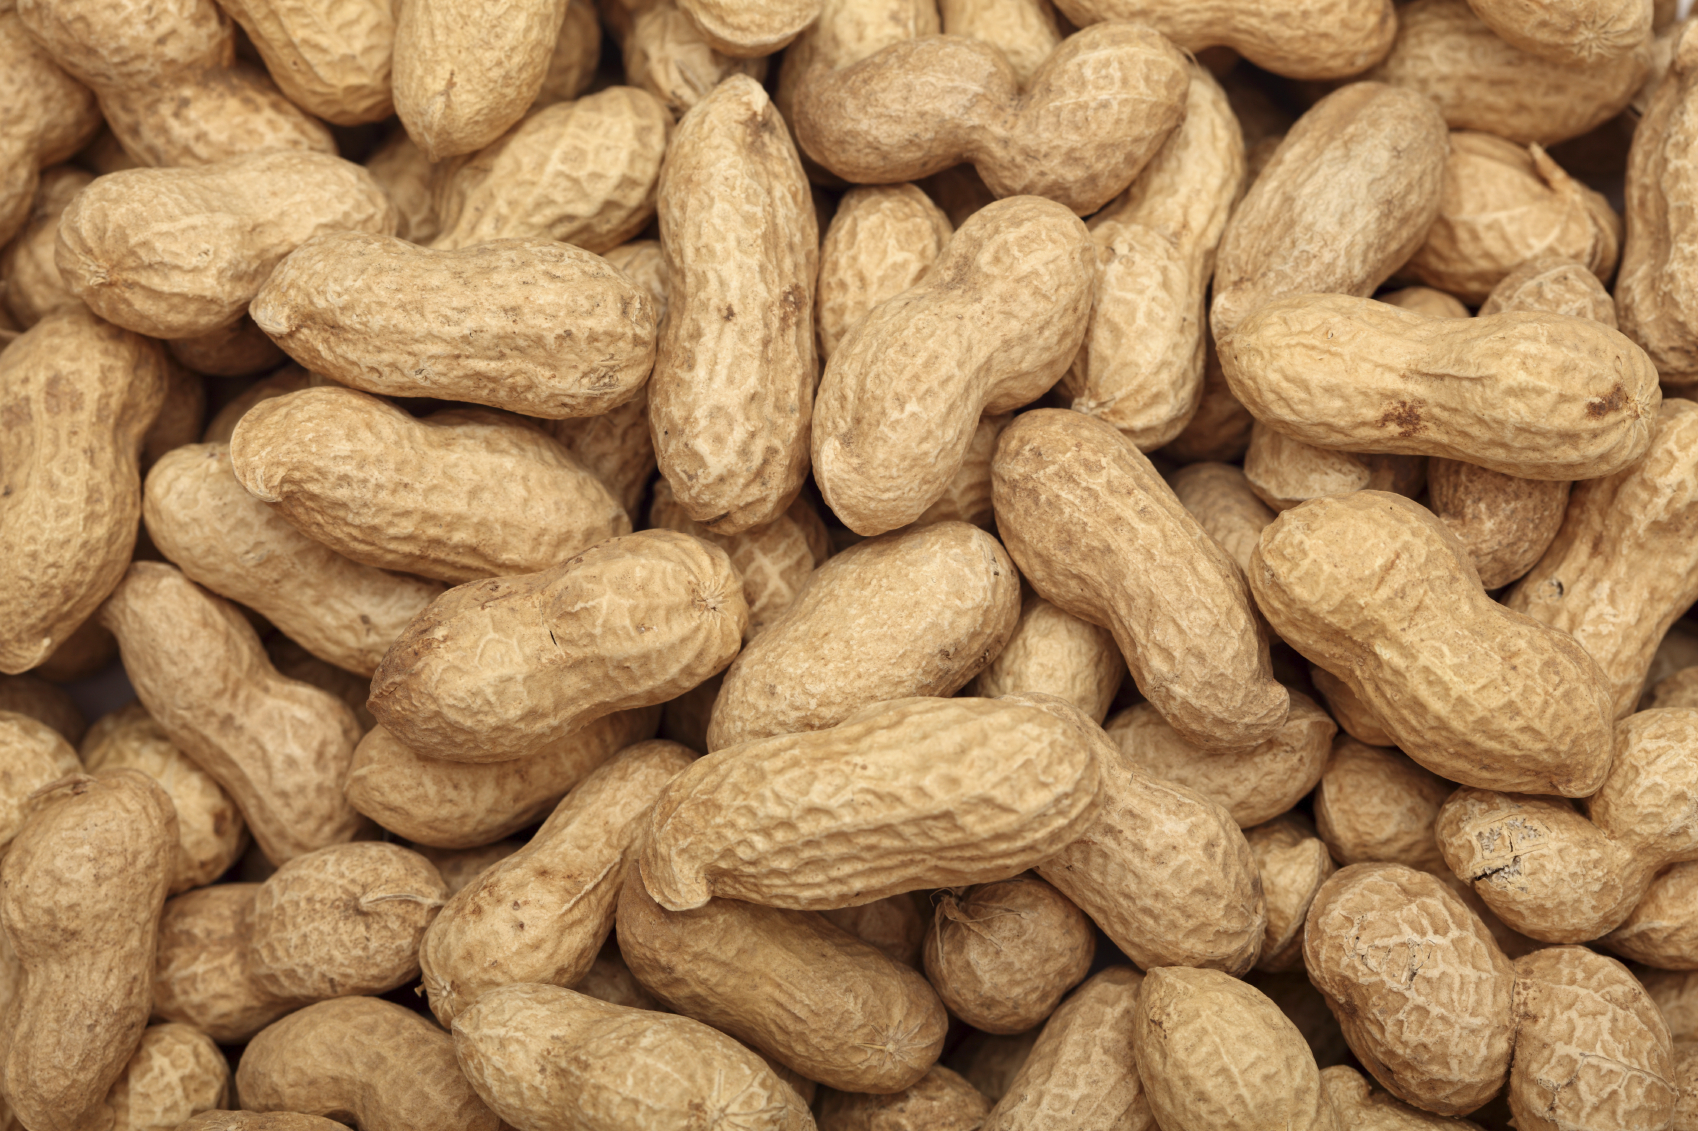 groundnuts or peanuts inside the husk